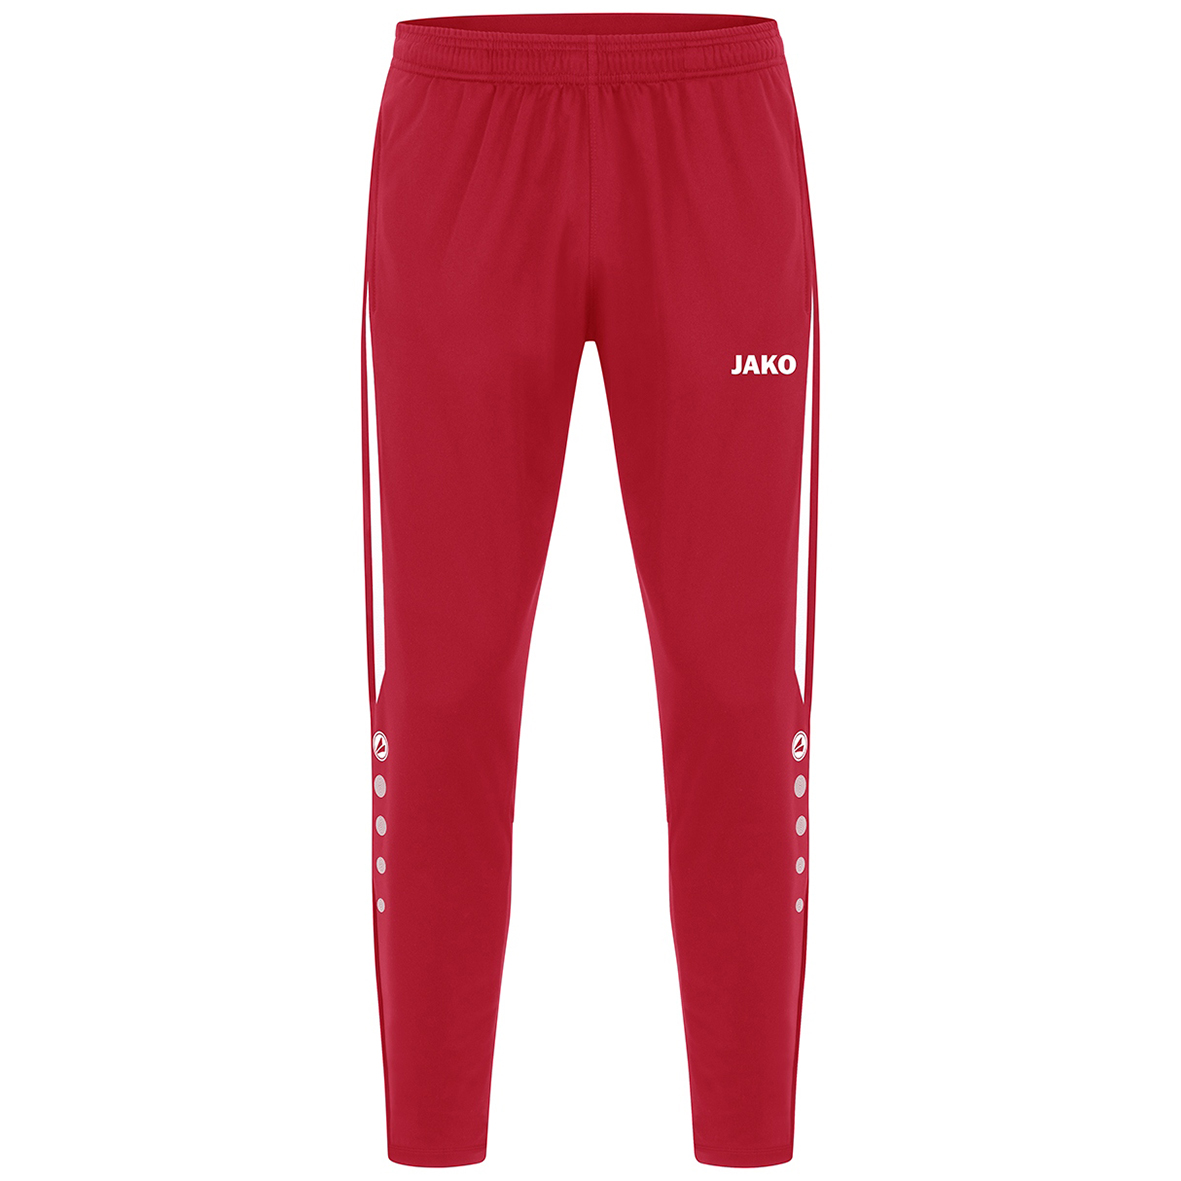 JAKO POWER POLYESTER TROUSERS, RED-WHITE KIDS.